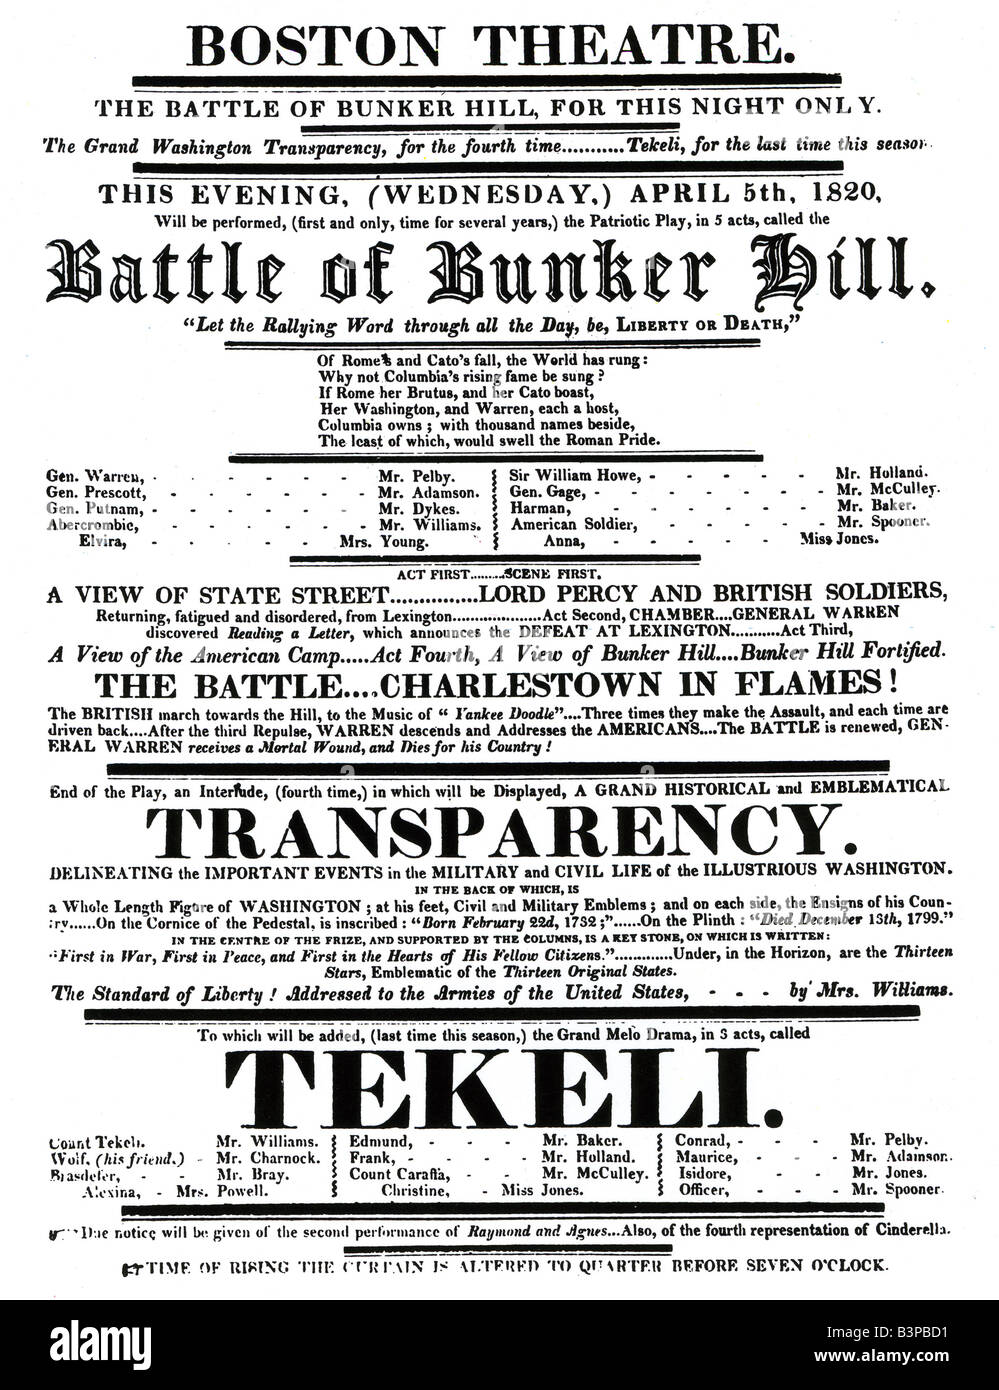 BATTLE OF BUNKER HILL Poster for theatrical re-enactment at the Boston Theatre in April 1820. The battle was in 1775 near Boston Stock Photo